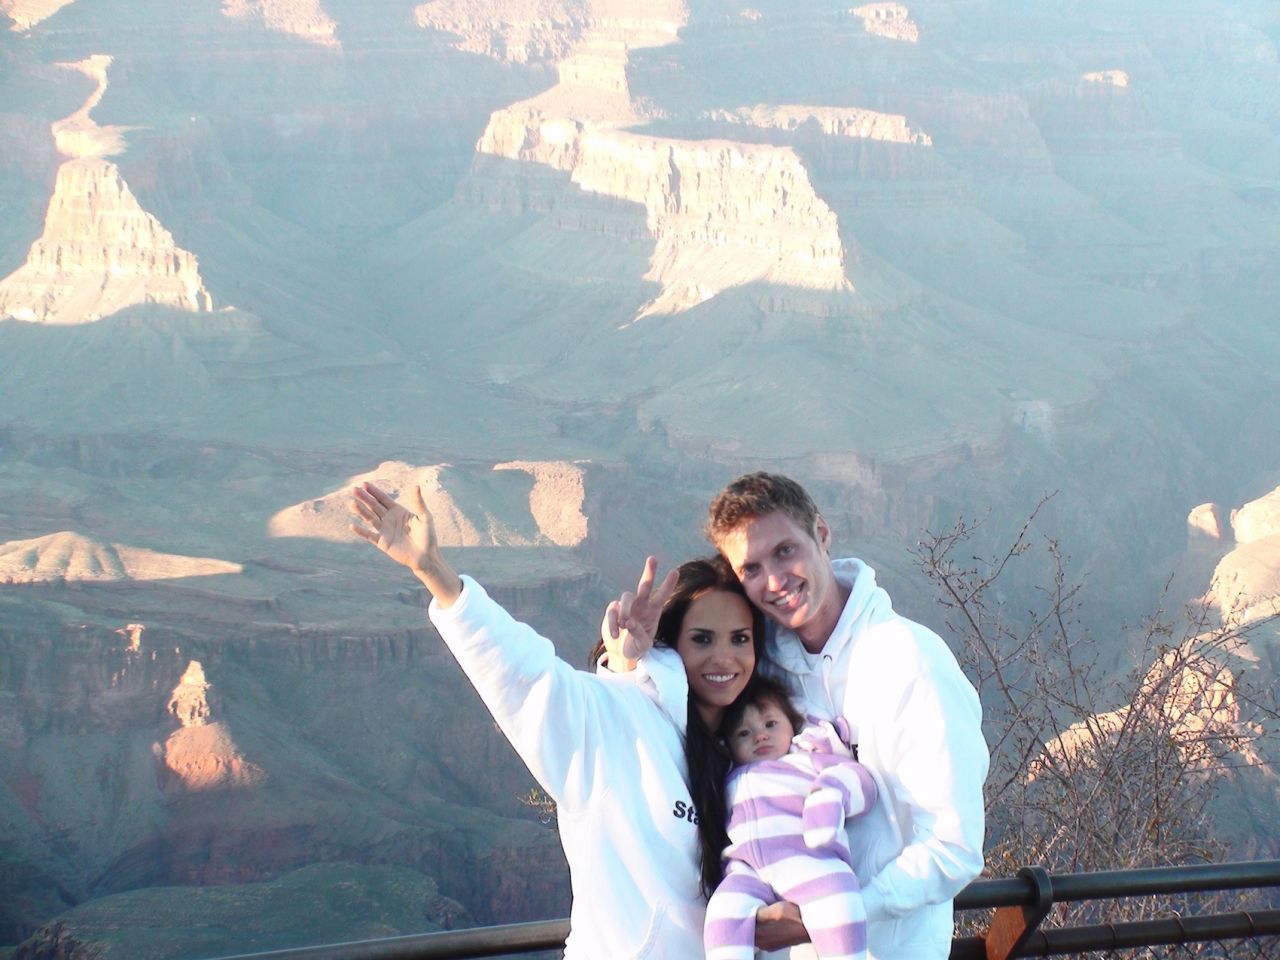 Mark and Ismini visited the Grand Canyon with their daughter Rafeala, while performing acts of kindness in Arizona.  